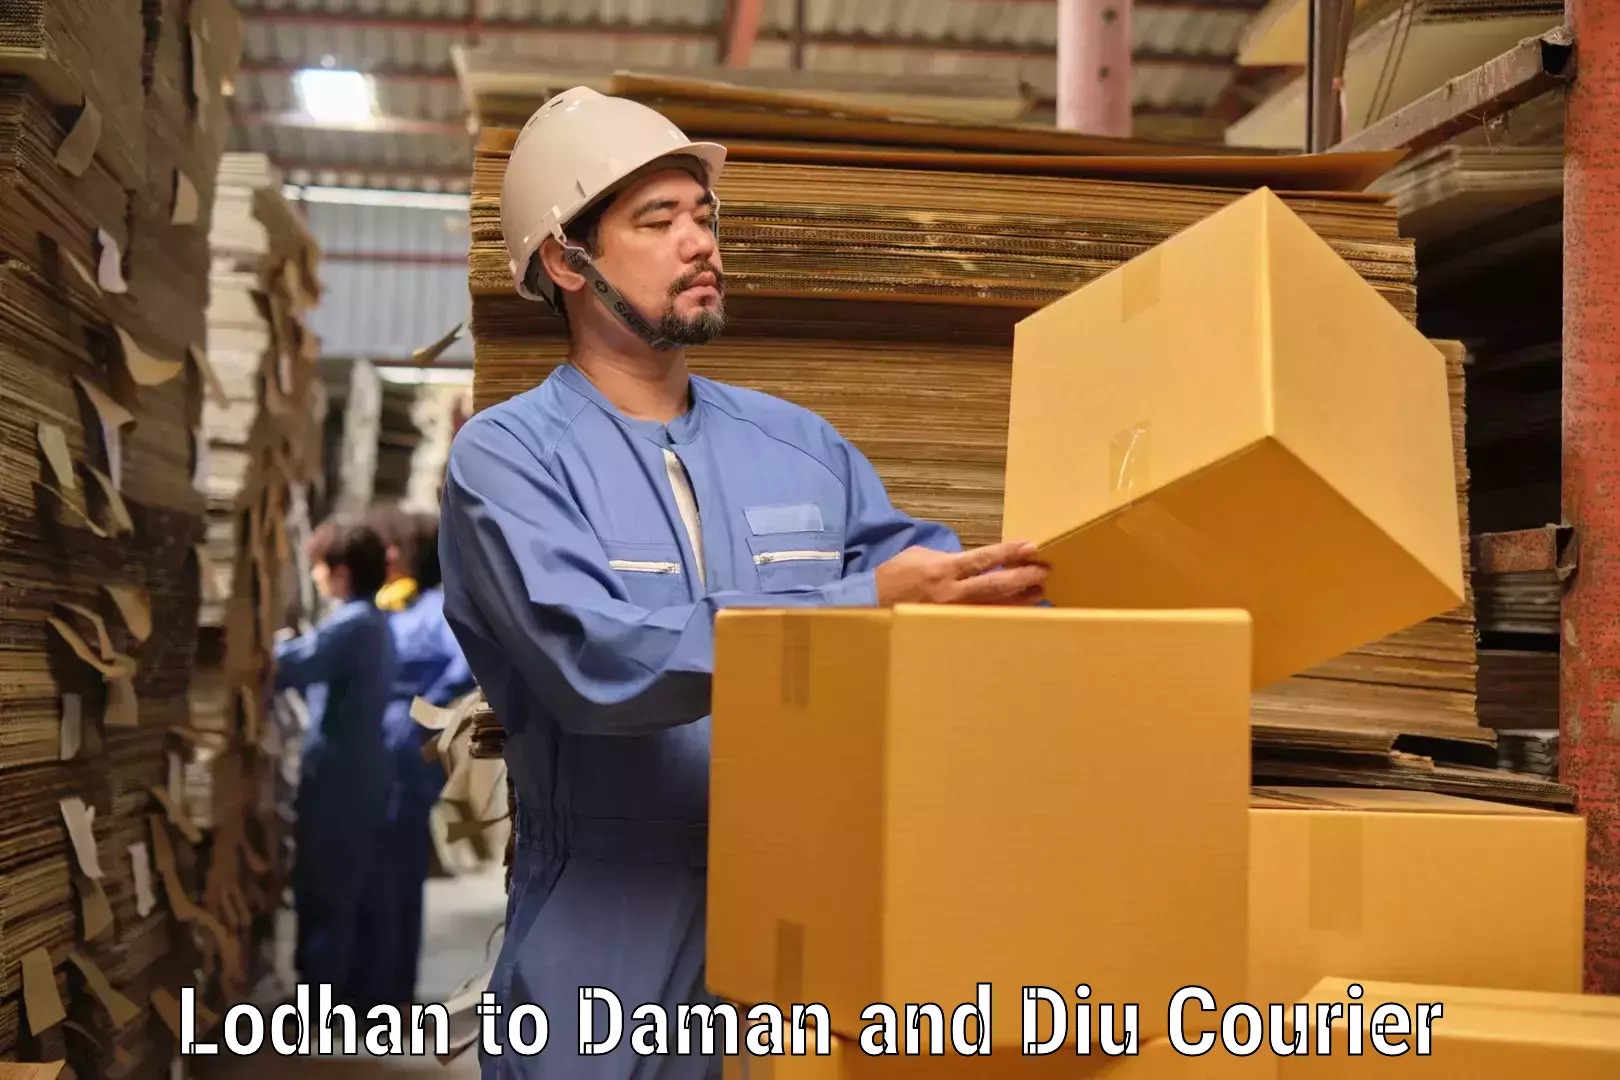 Reliable parcel services Lodhan to Daman and Diu